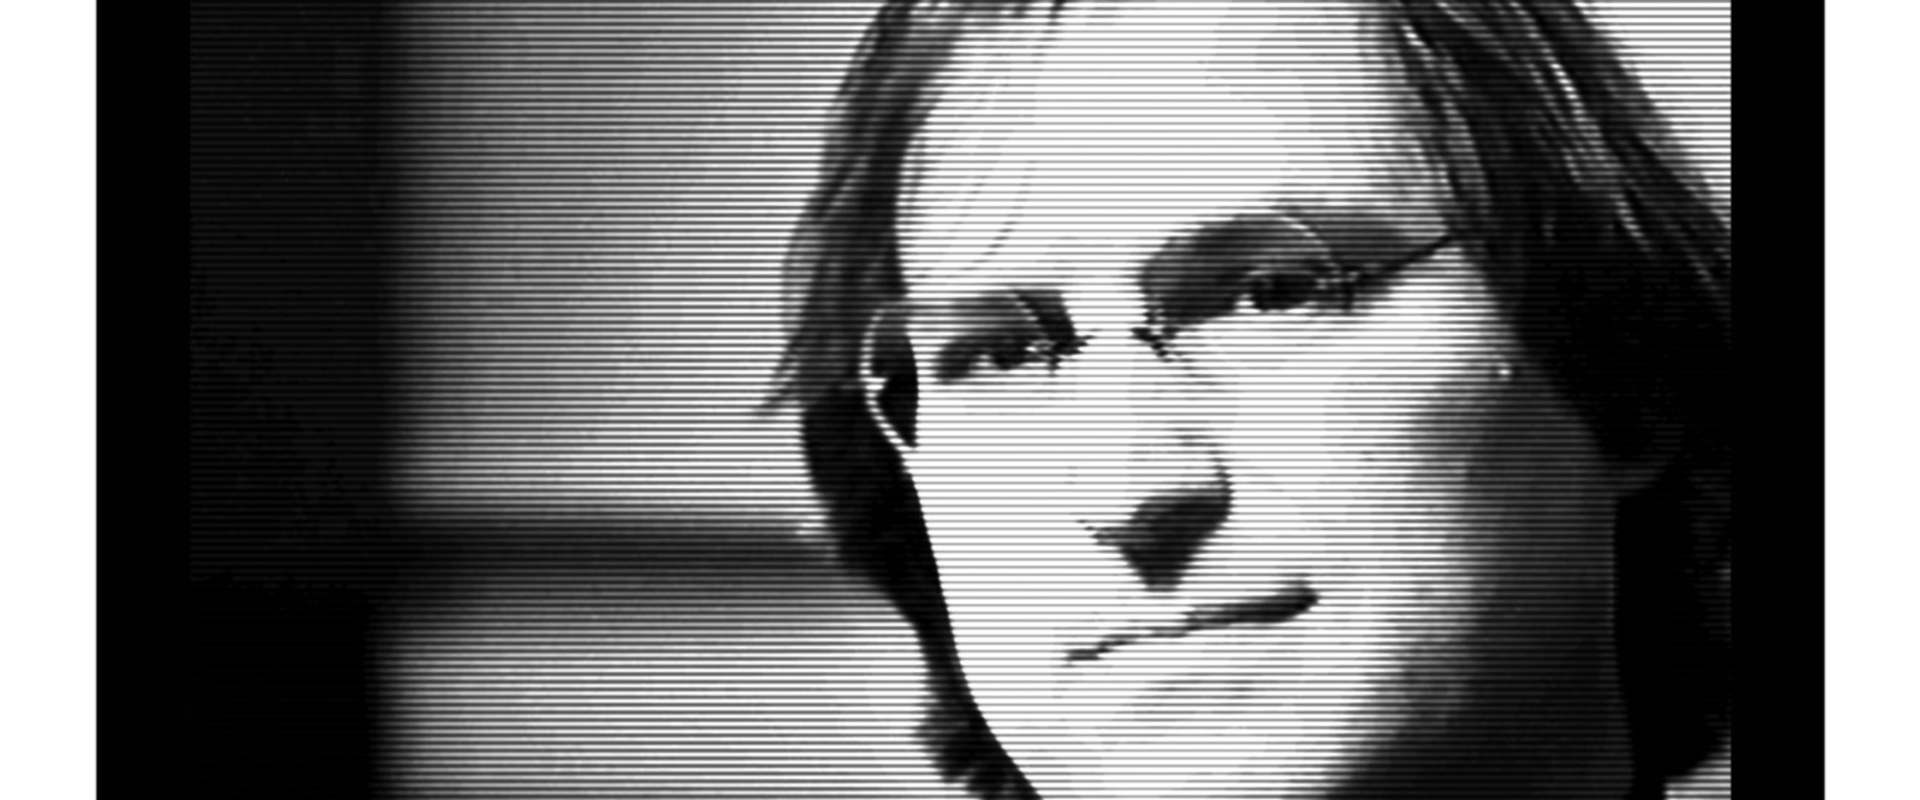 Steve Jobs: The Lost Interview background 1